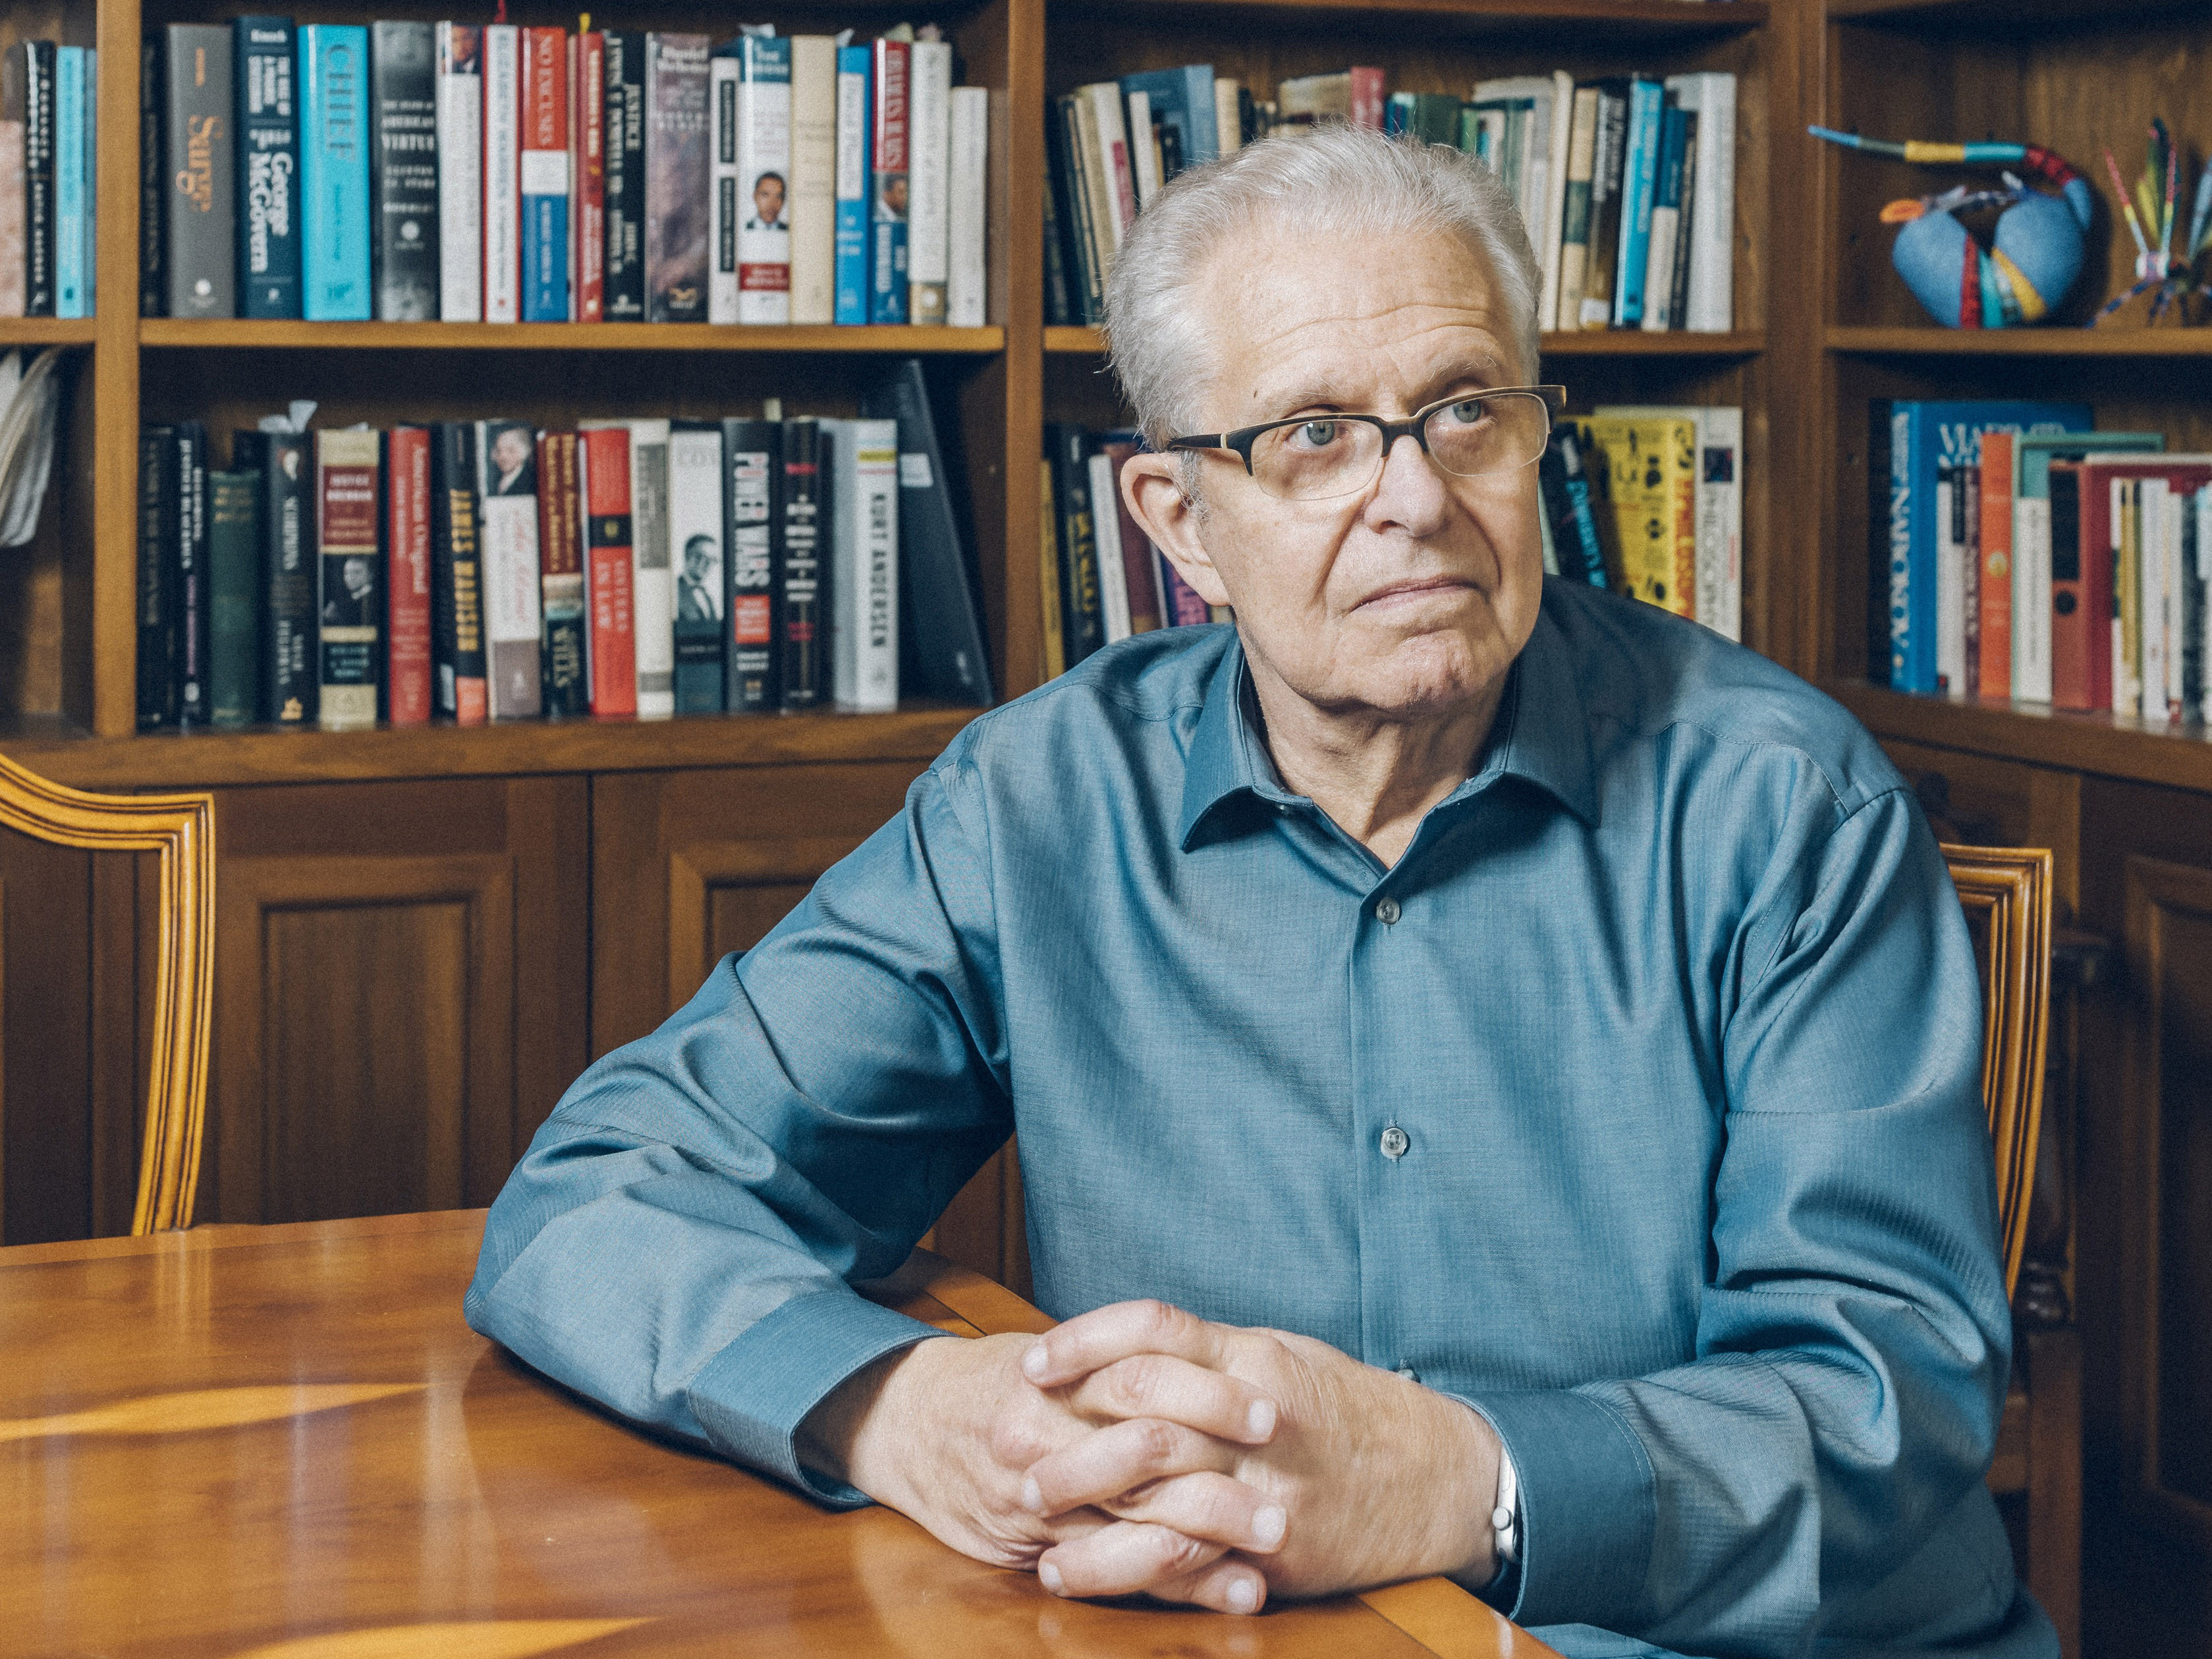 Professor Laurence Tribe at his home in Brookline, Massachusetts Friday November 3, 2017. Laurence Henry "Larry" Tribe is a professor of constitutional law at Harvard Law School and the Carl M. Loeb University Professor at Harvard University. He also works with the firm Massey &amp; Gail LLP on a variety of matters. (Jared Soares—Redux)